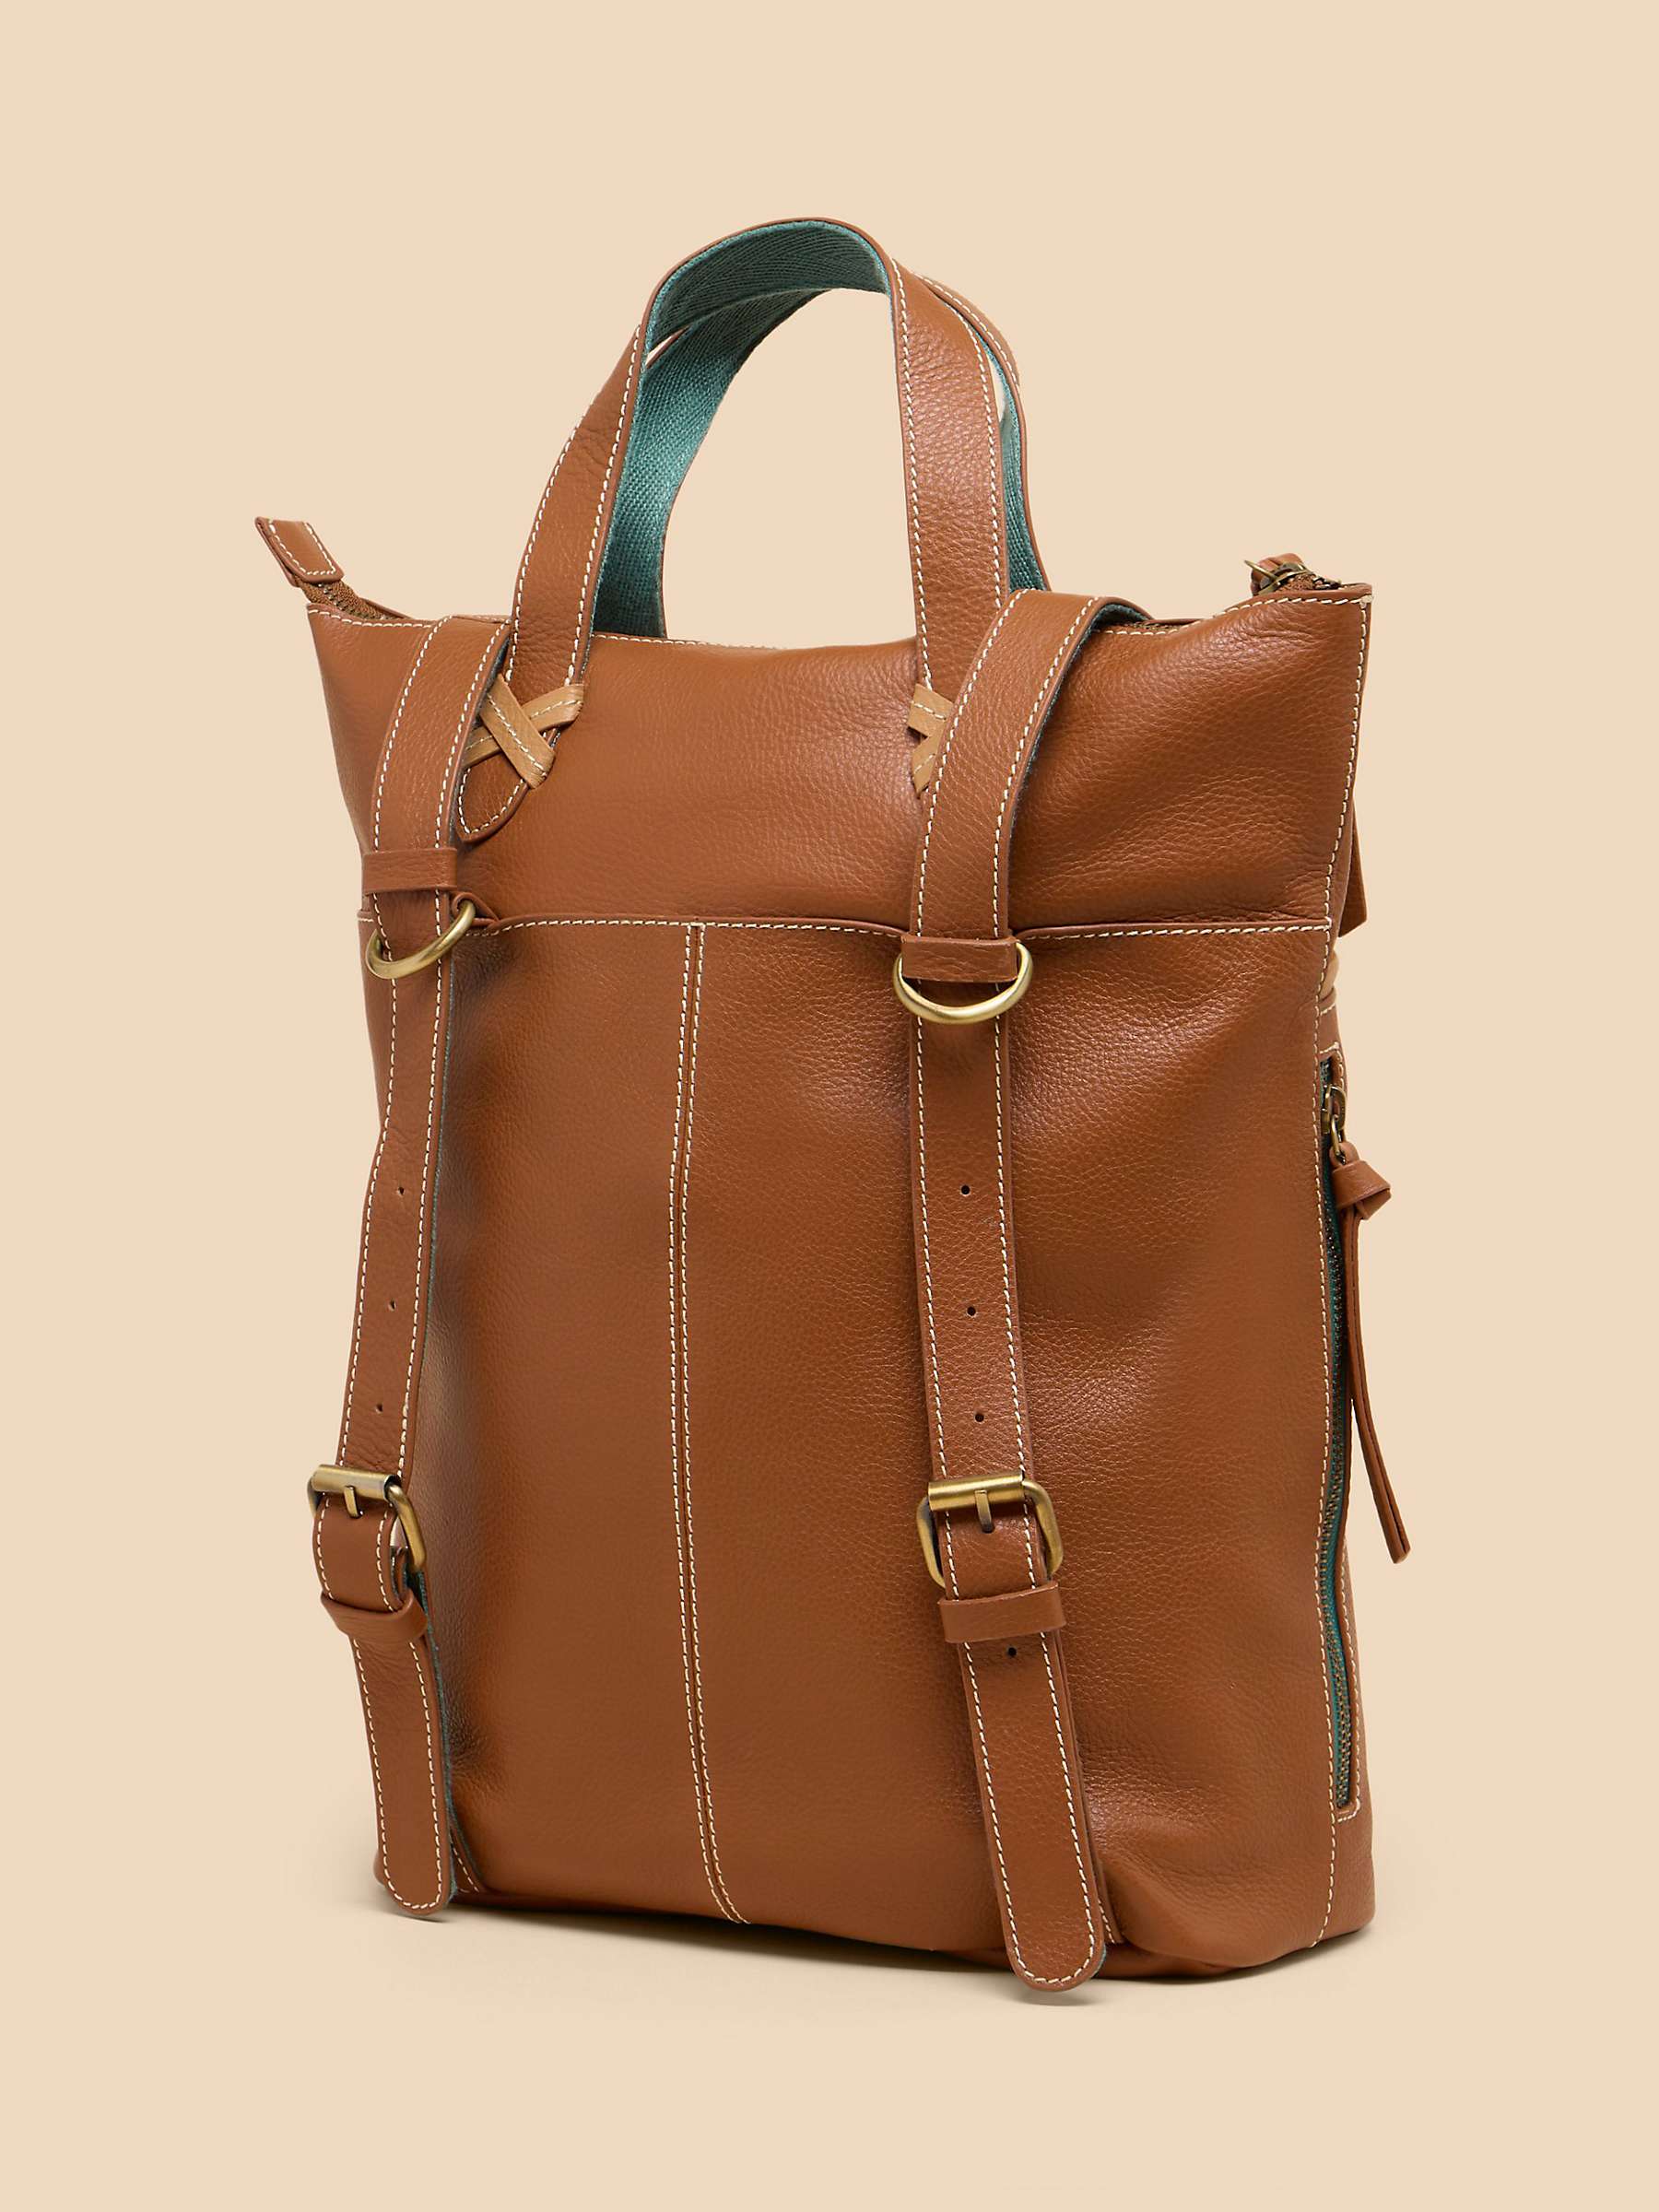 Buy White Stuff Convertible Leather Backpack Online at johnlewis.com